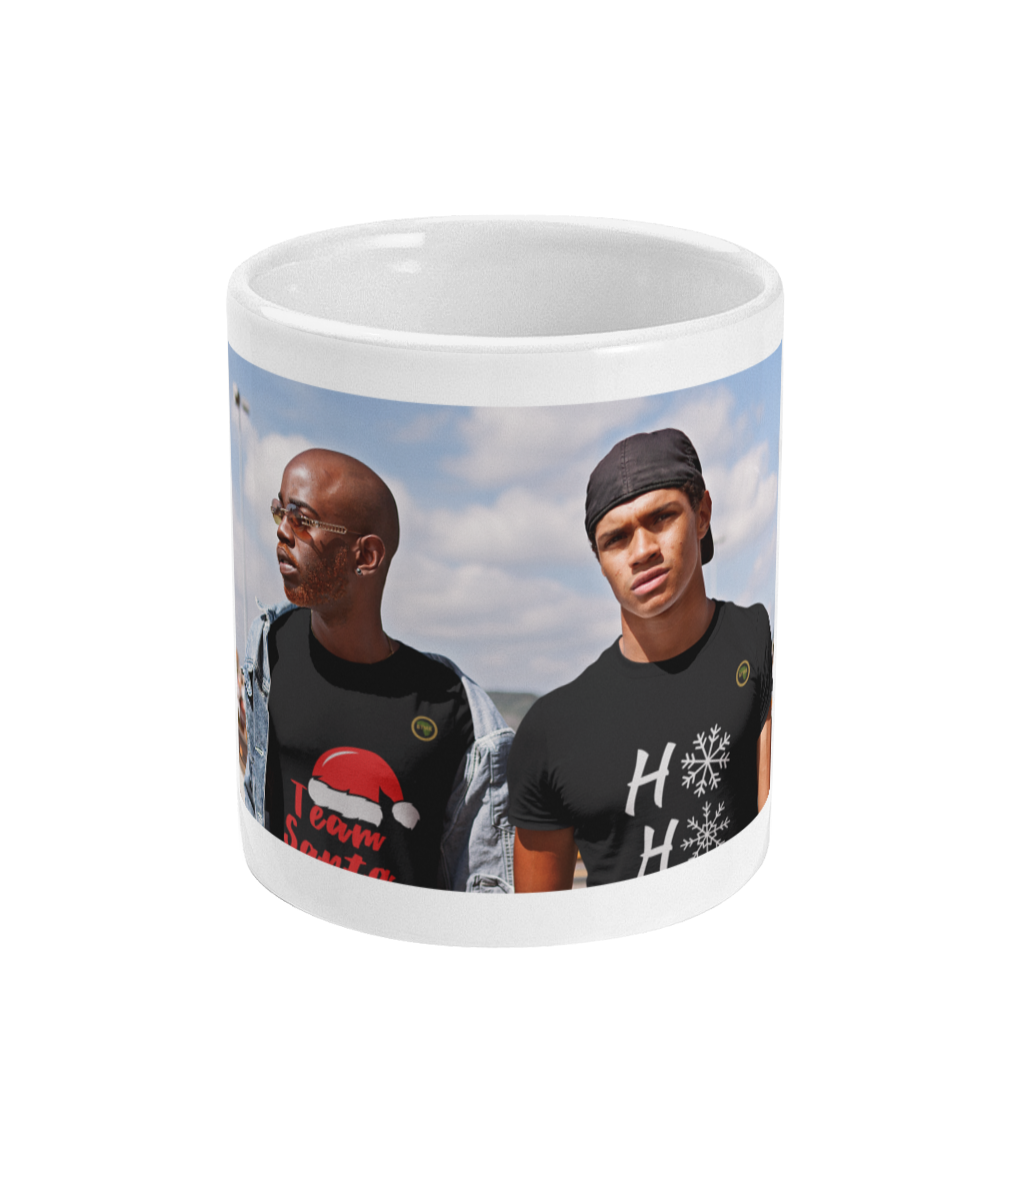 Personalised full wrap photo upload cup